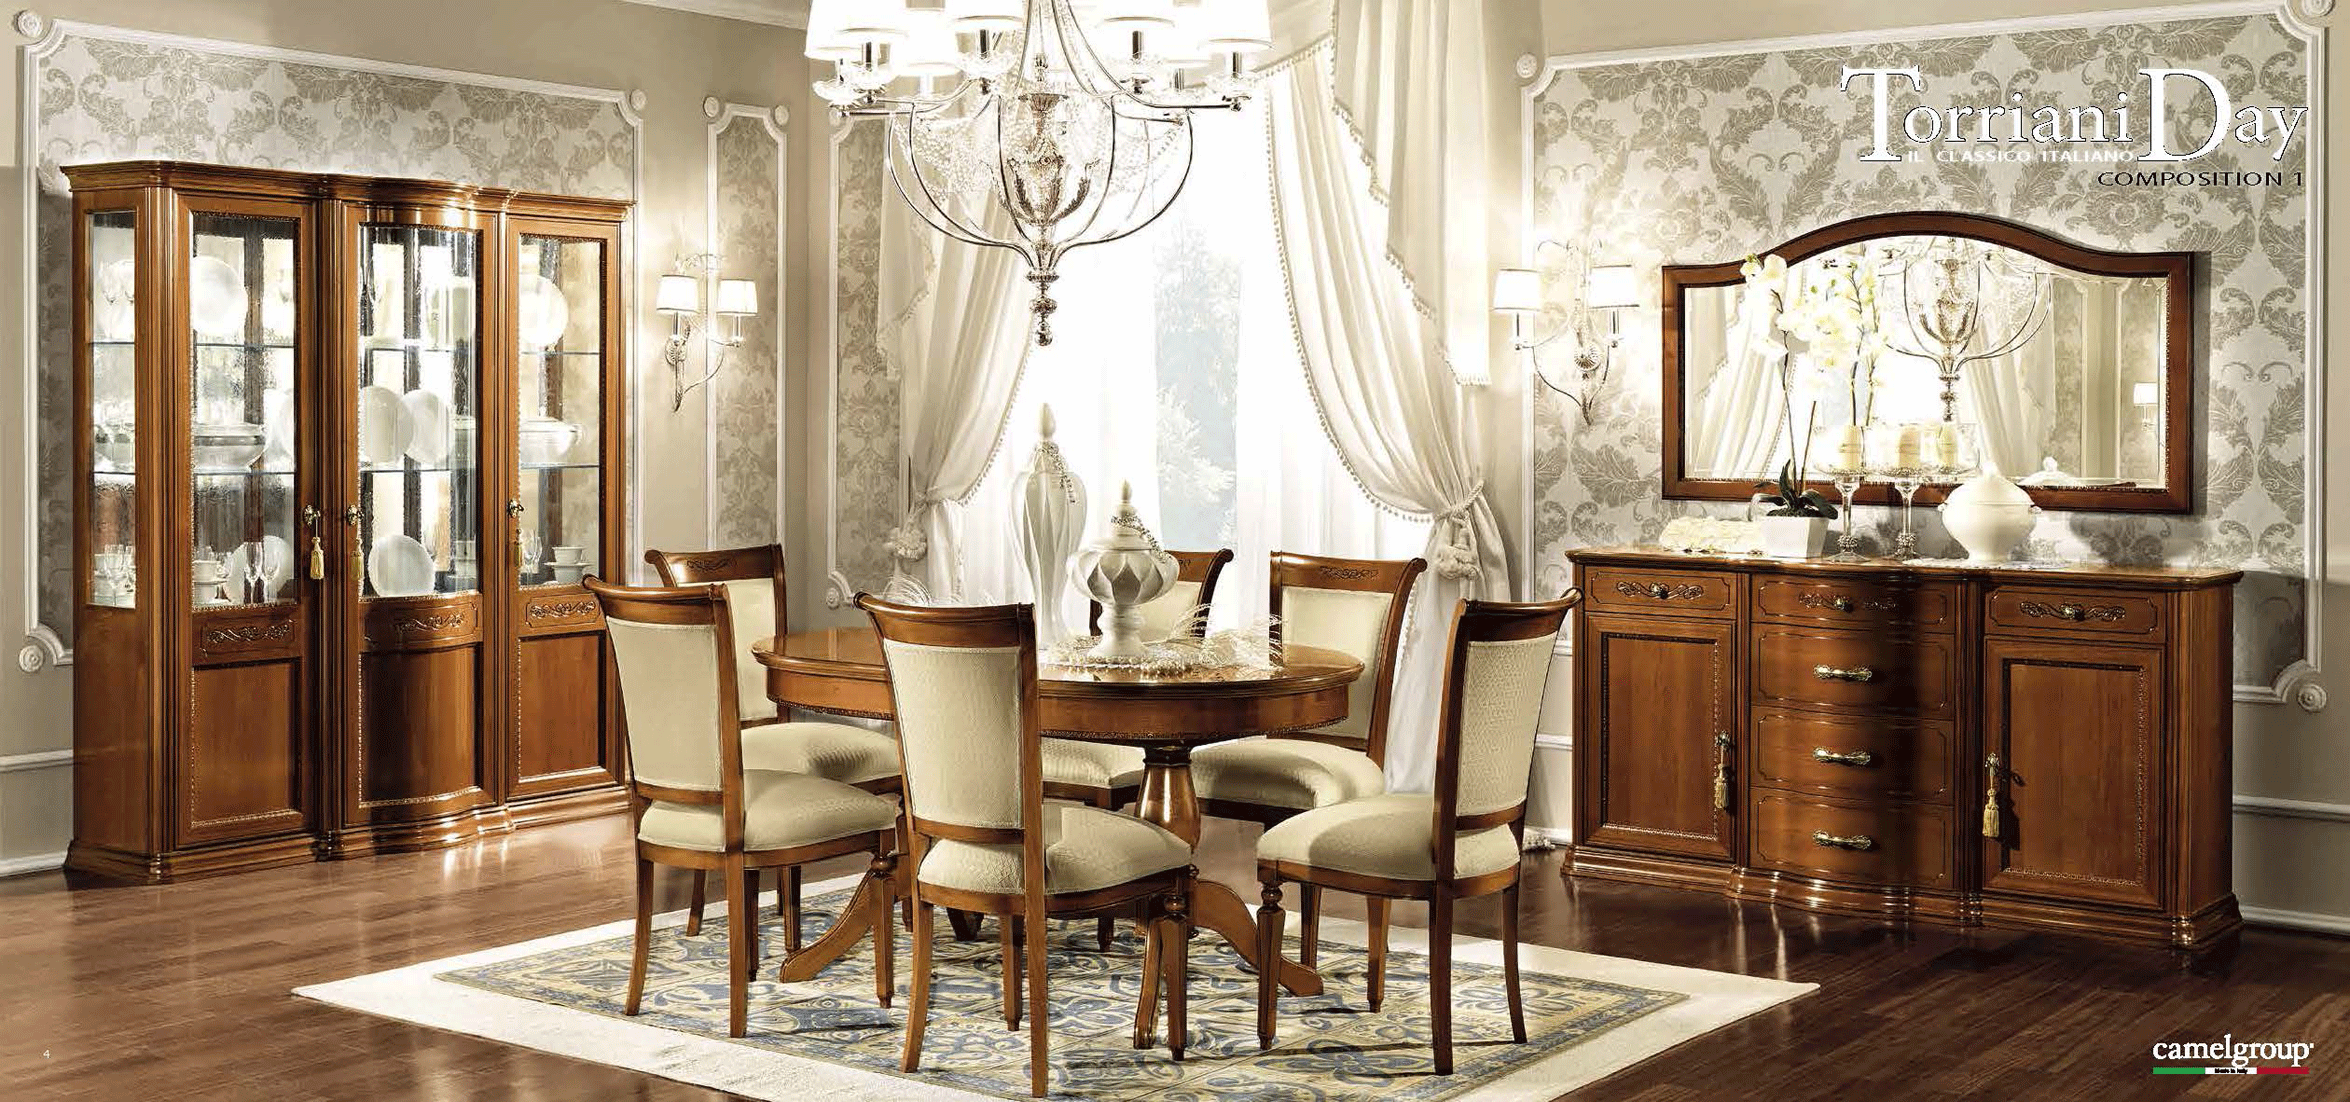 Dining Room Furniture Tables Torriani Day